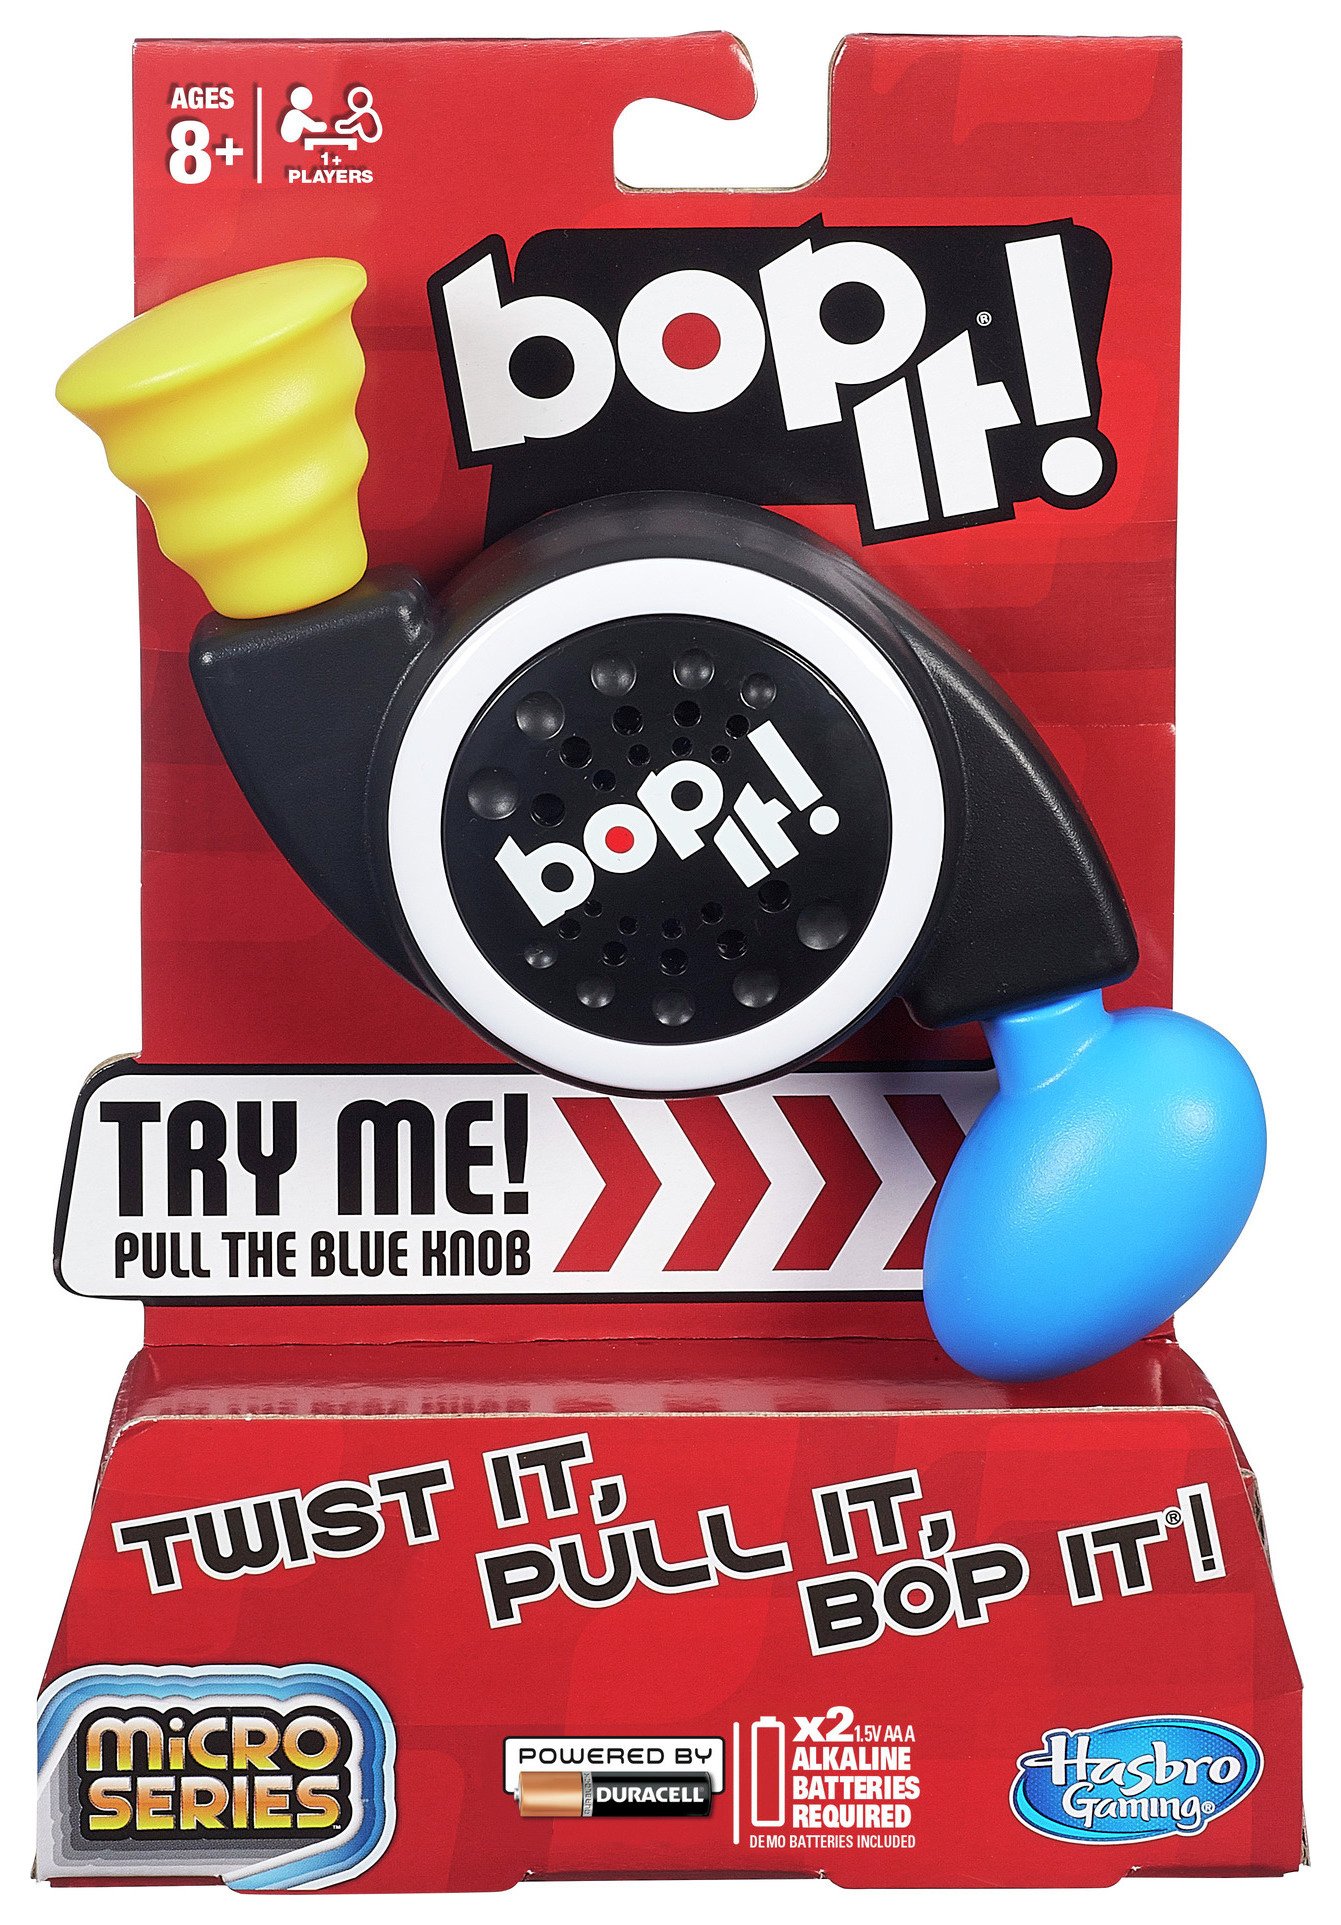 Bop It! Micro Series Game from Hasbro Gaming